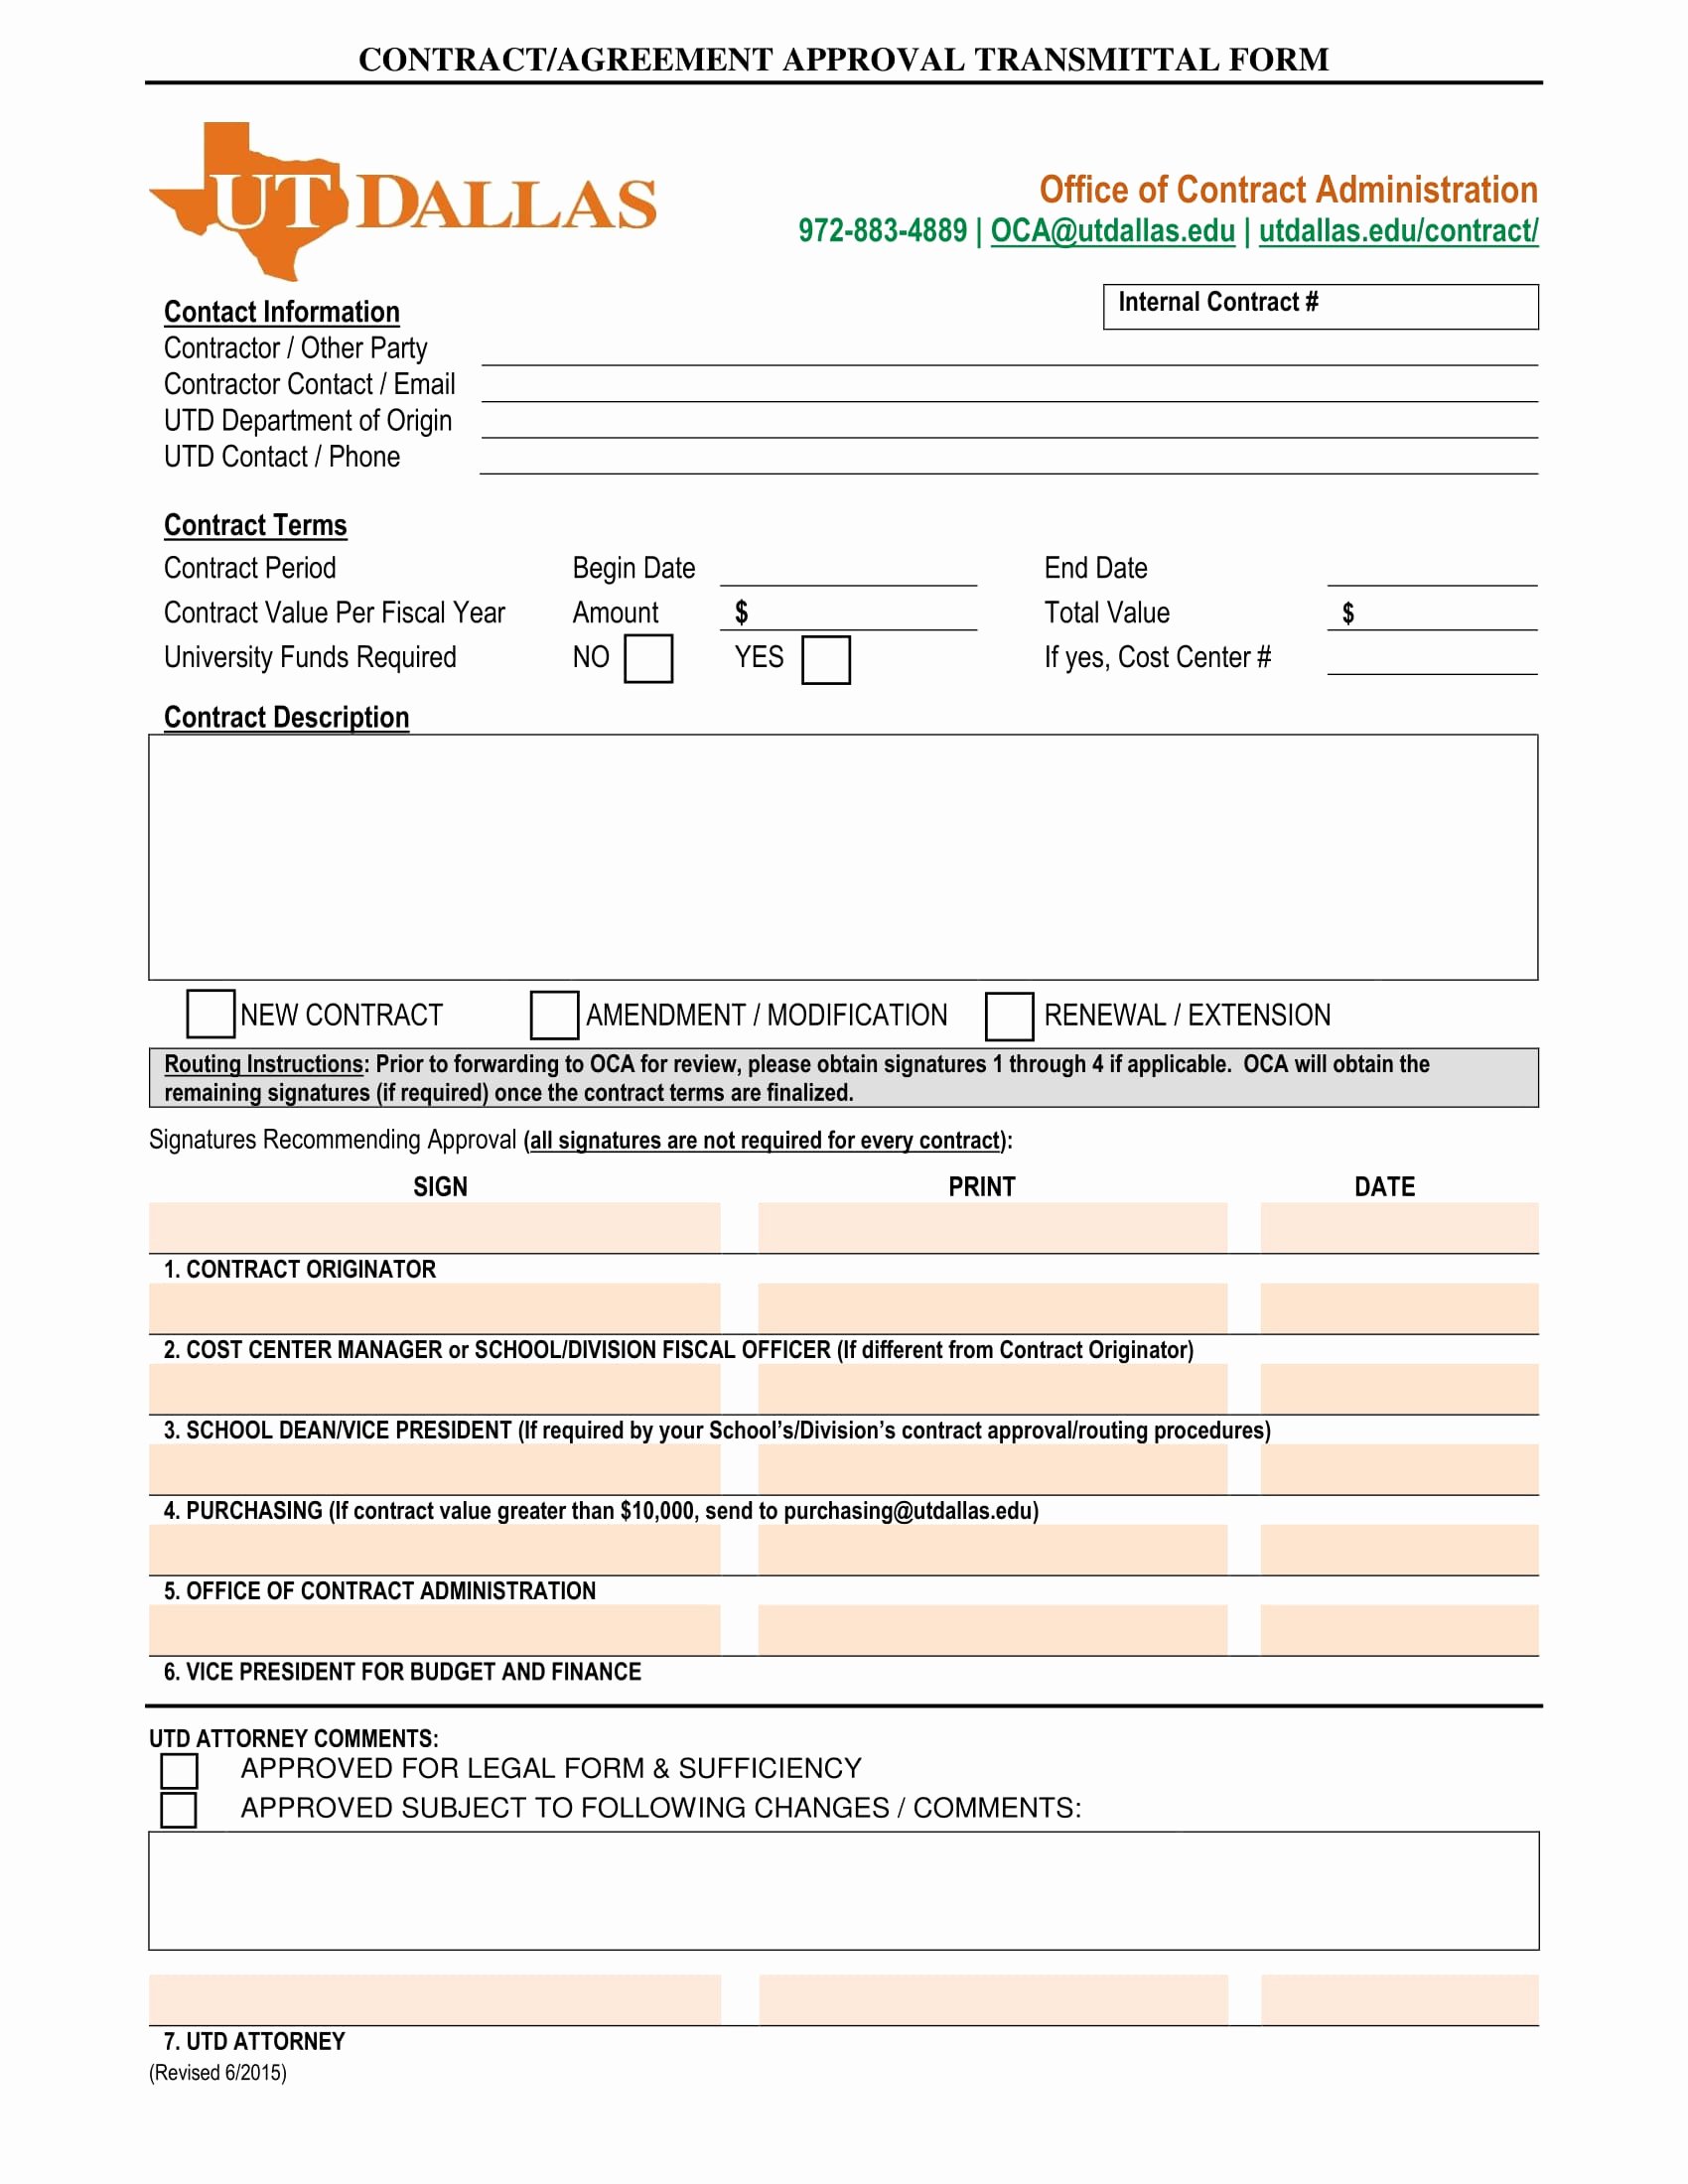 Material Transmittal form Best Of 10 Approval forms Travel Request and Approval form